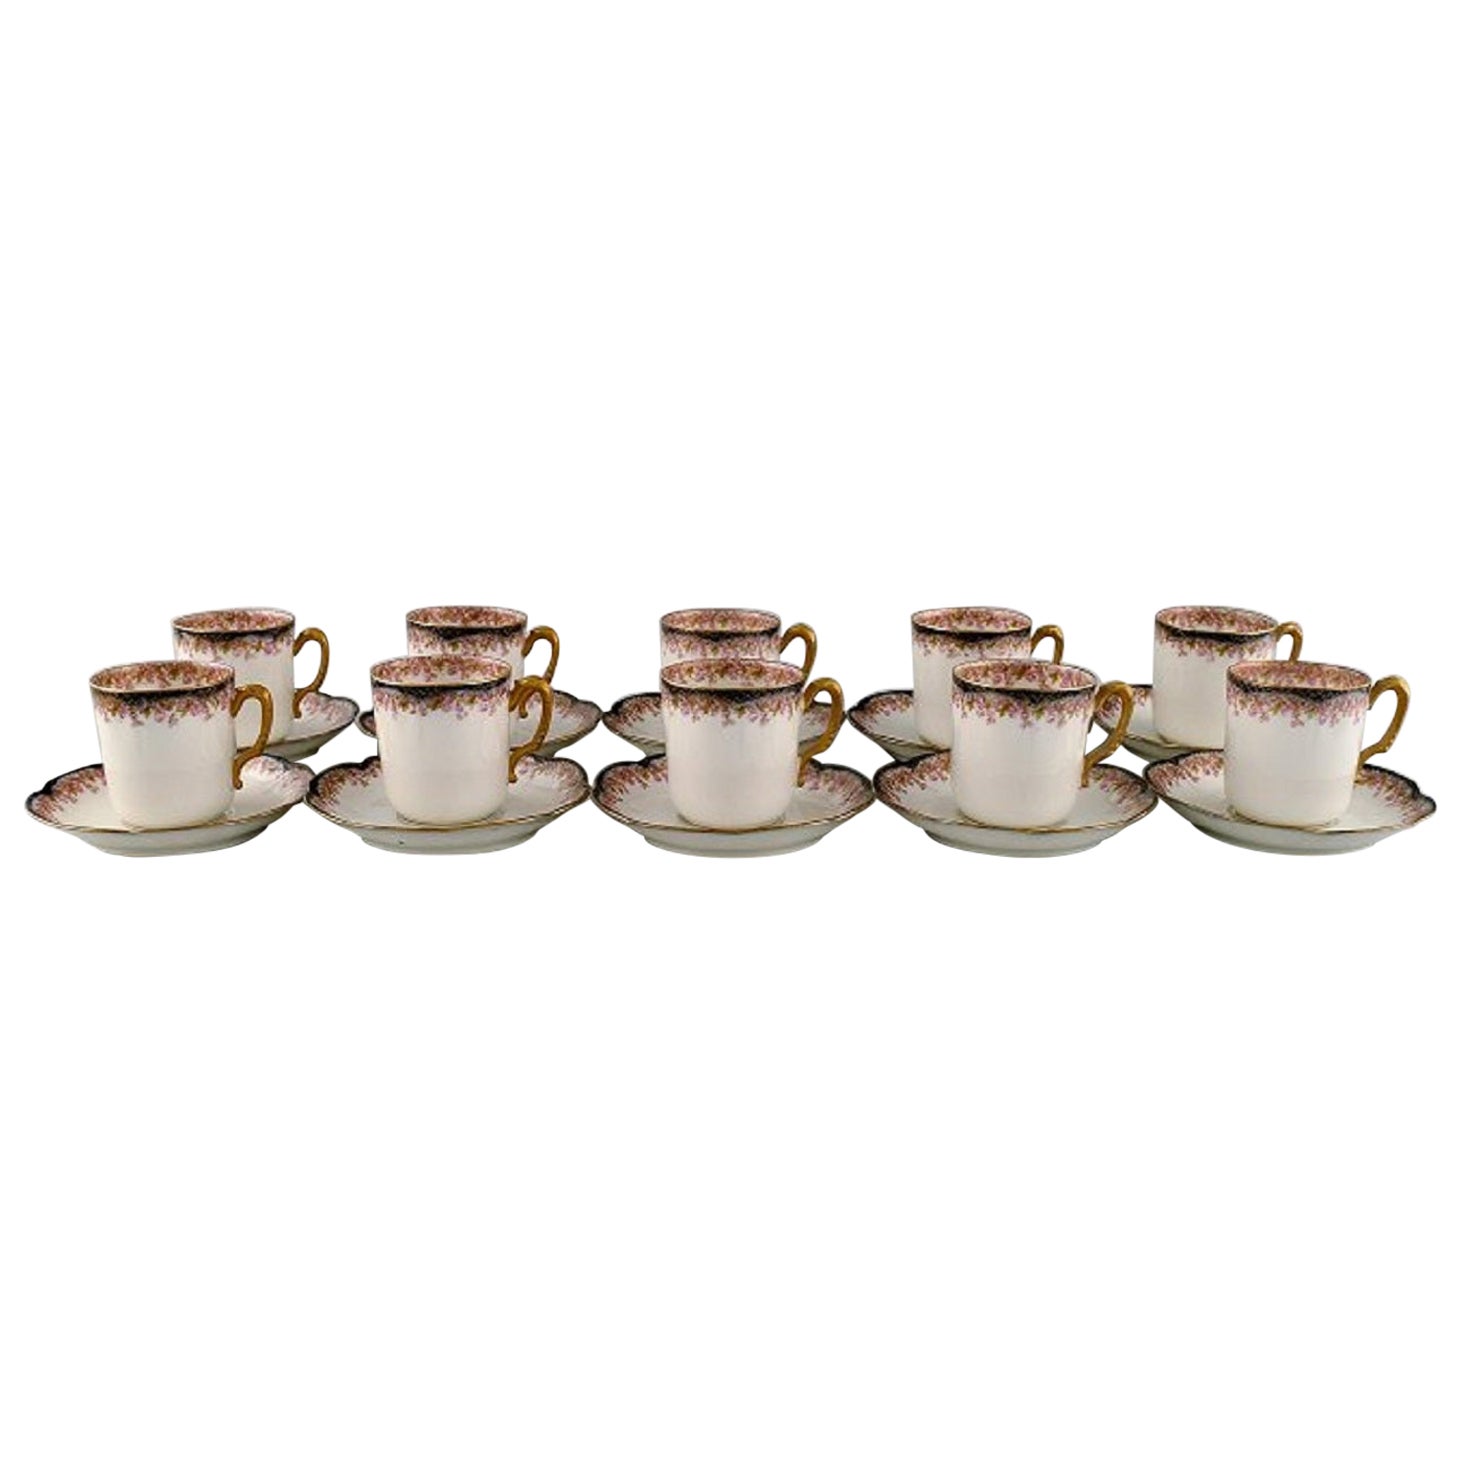 Limoges, France, 10 Mocha Cups with Saucers in Hand-Painted Porcelain For Sale